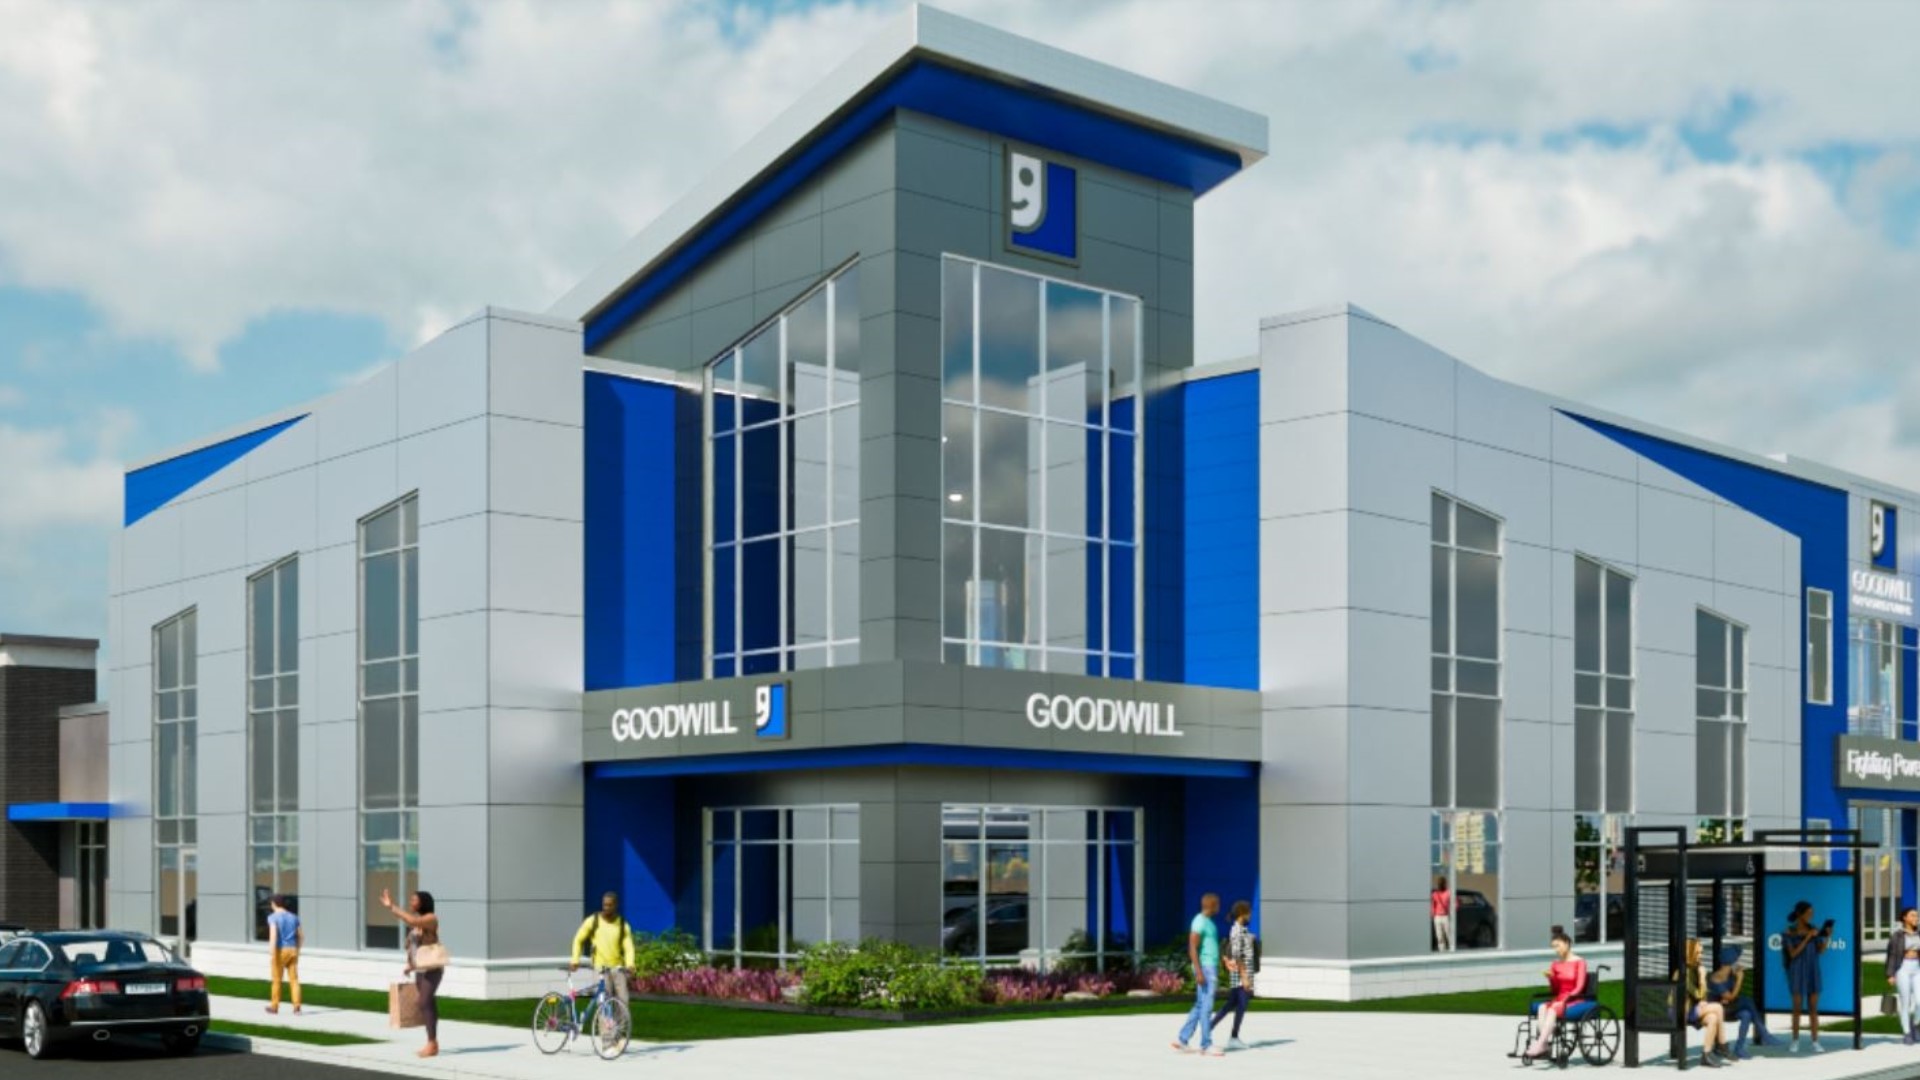 At $50 million, Goodwill Industries of Kentucky says this is the largest mission-related investment in its 100-year history.